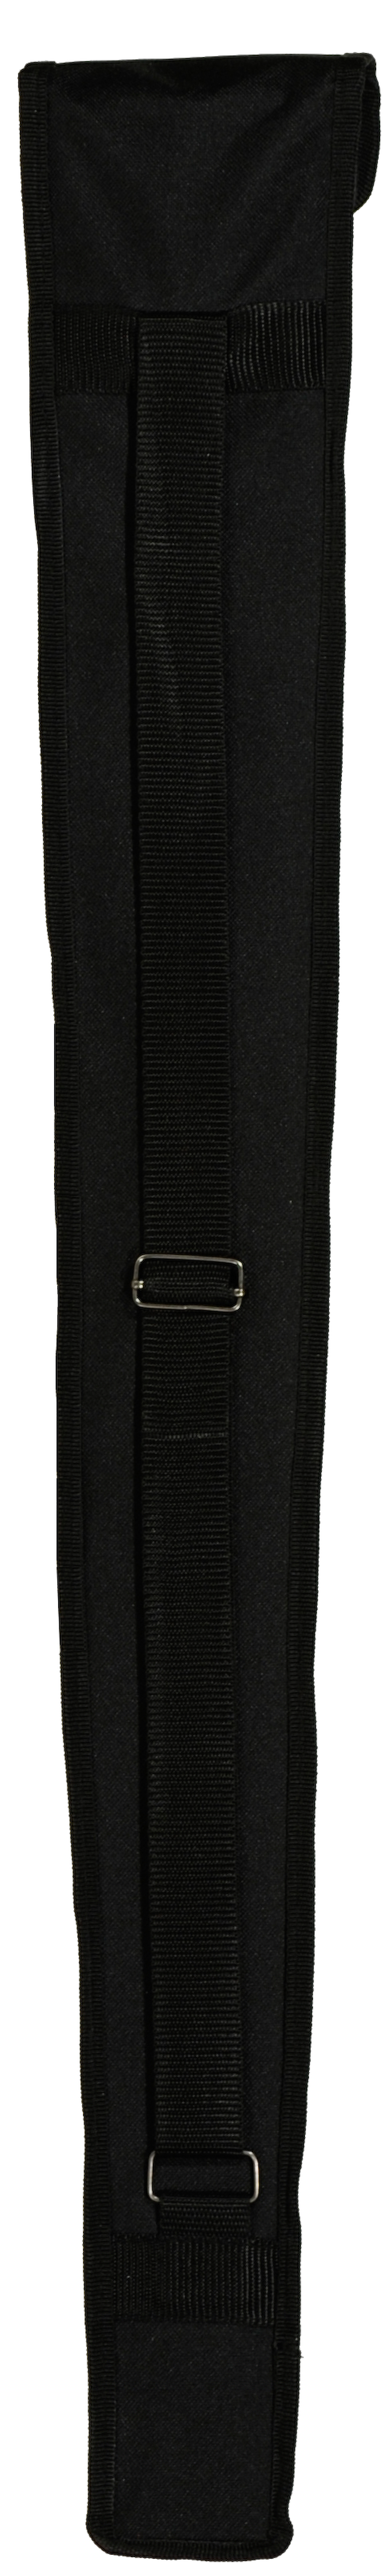 Shen Bass Bow Case – CURRENTLY OUT OF STOCK | J.R. Judd Violins